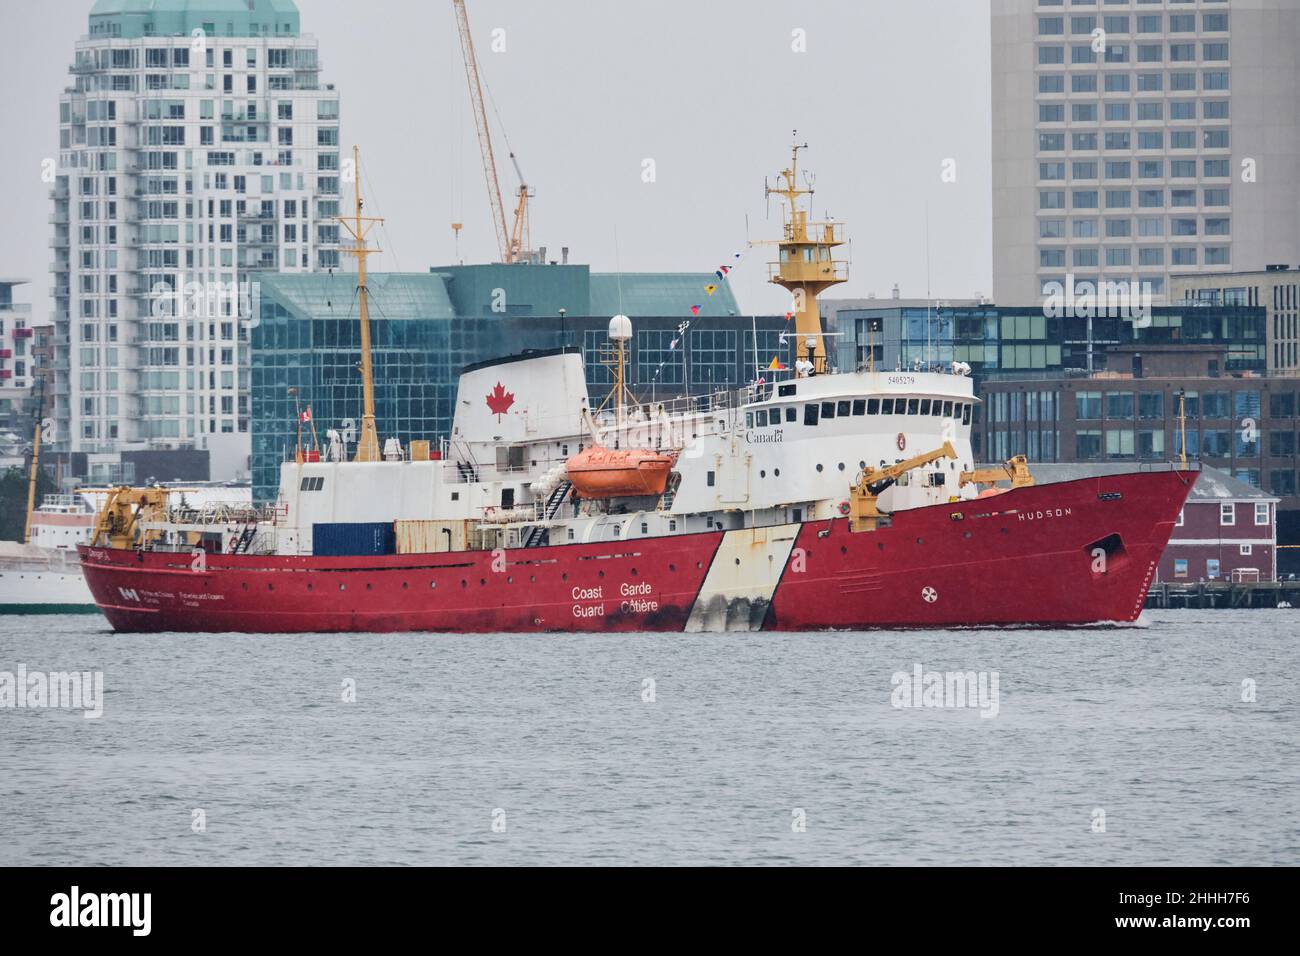 Halifax, Nova Scotia, Canada. January 24th, 2022. The CCGS Hudson enters the Halifax Harbour one last time. The 59-year old research vessel CCGS Hudson, Canadian Coast Guard oldest serving vessel, is set to be decommissioned, according to a statement from the Canadian Coast Guard released last week, deeming it beyond “economical repair” following a catastrophic mechanical failure last fall. Stock Photo